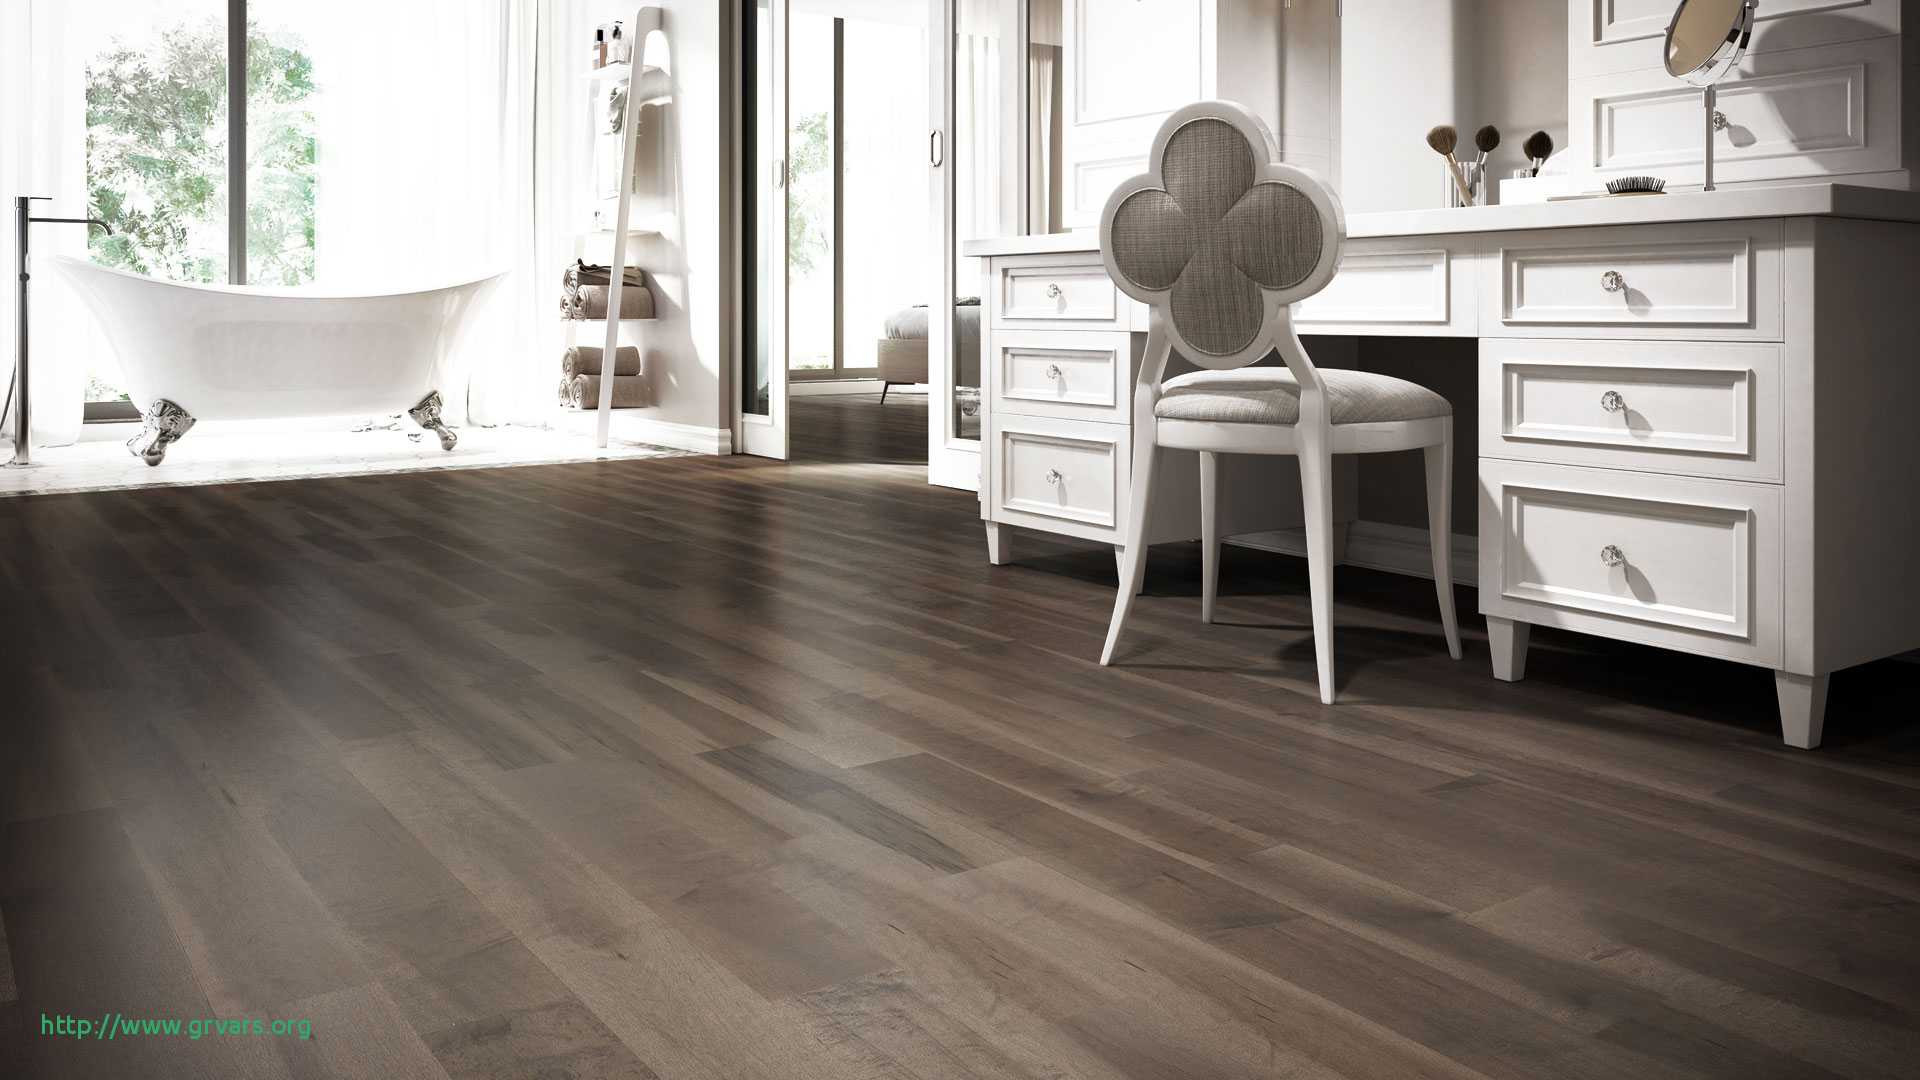 12 attractive Indoor Humidity for Hardwood Floors 2024 free download indoor humidity for hardwood floors of 24 beau changing the color of hardwood floors ideas blog in changing the color of hardwood floors beau 4 latest hardwood flooring trends